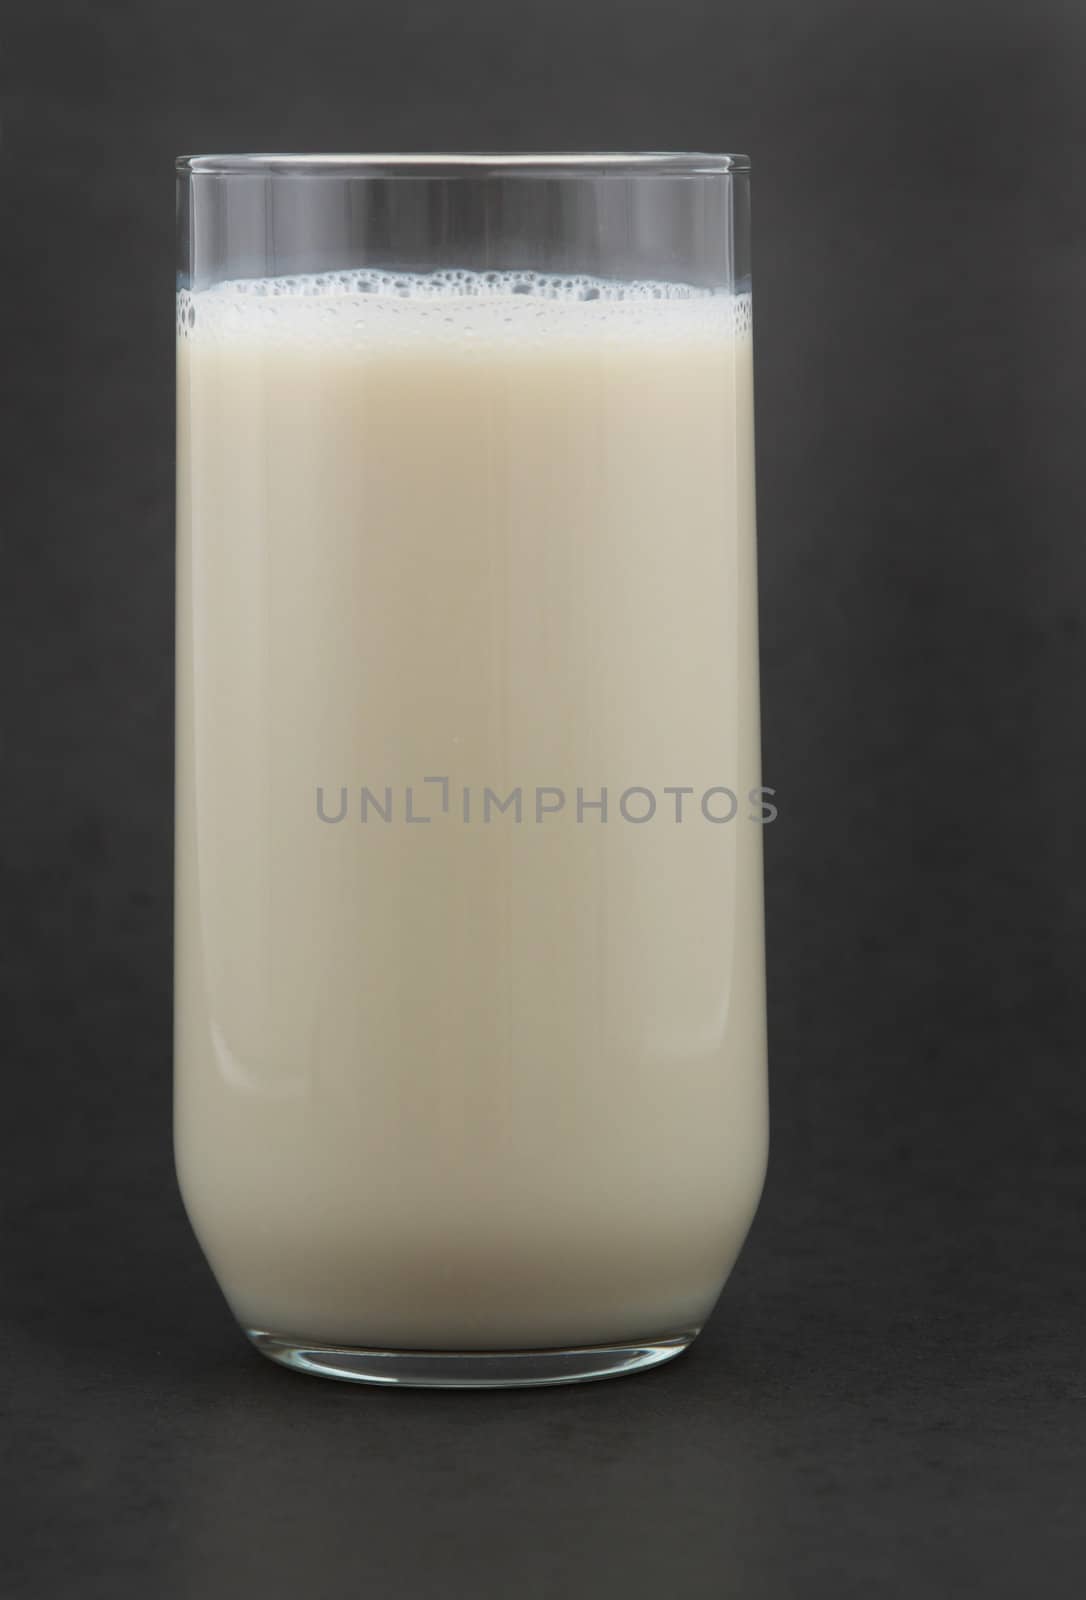 big glass of natural soy beverage, white background